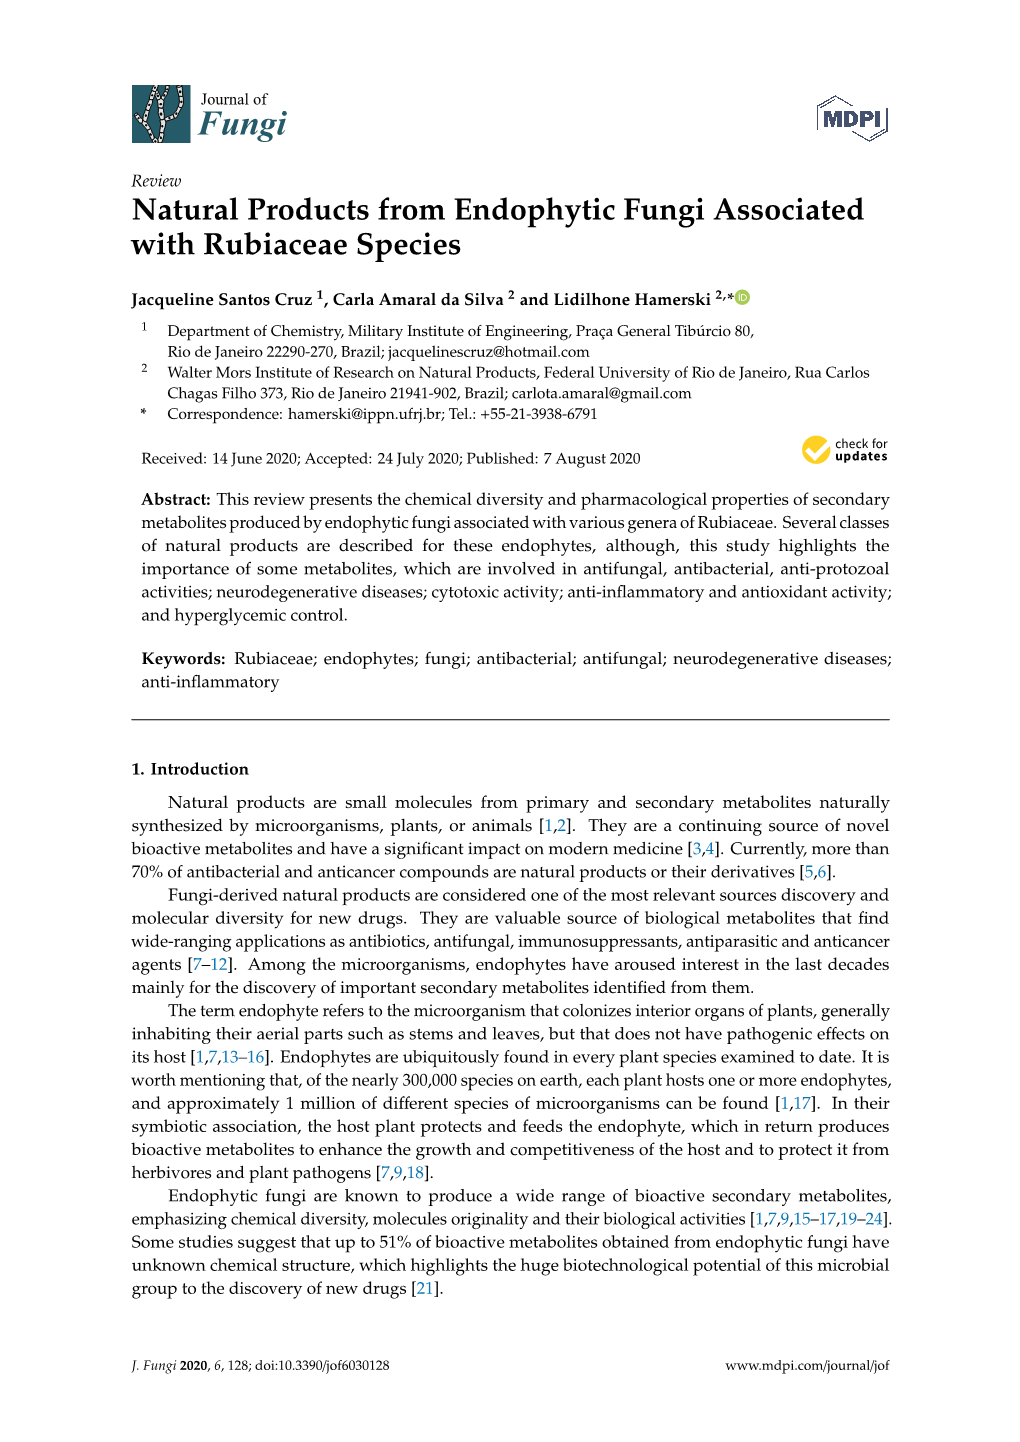 Natural Products from Endophytic Fungi Associated with Rubiaceae Species